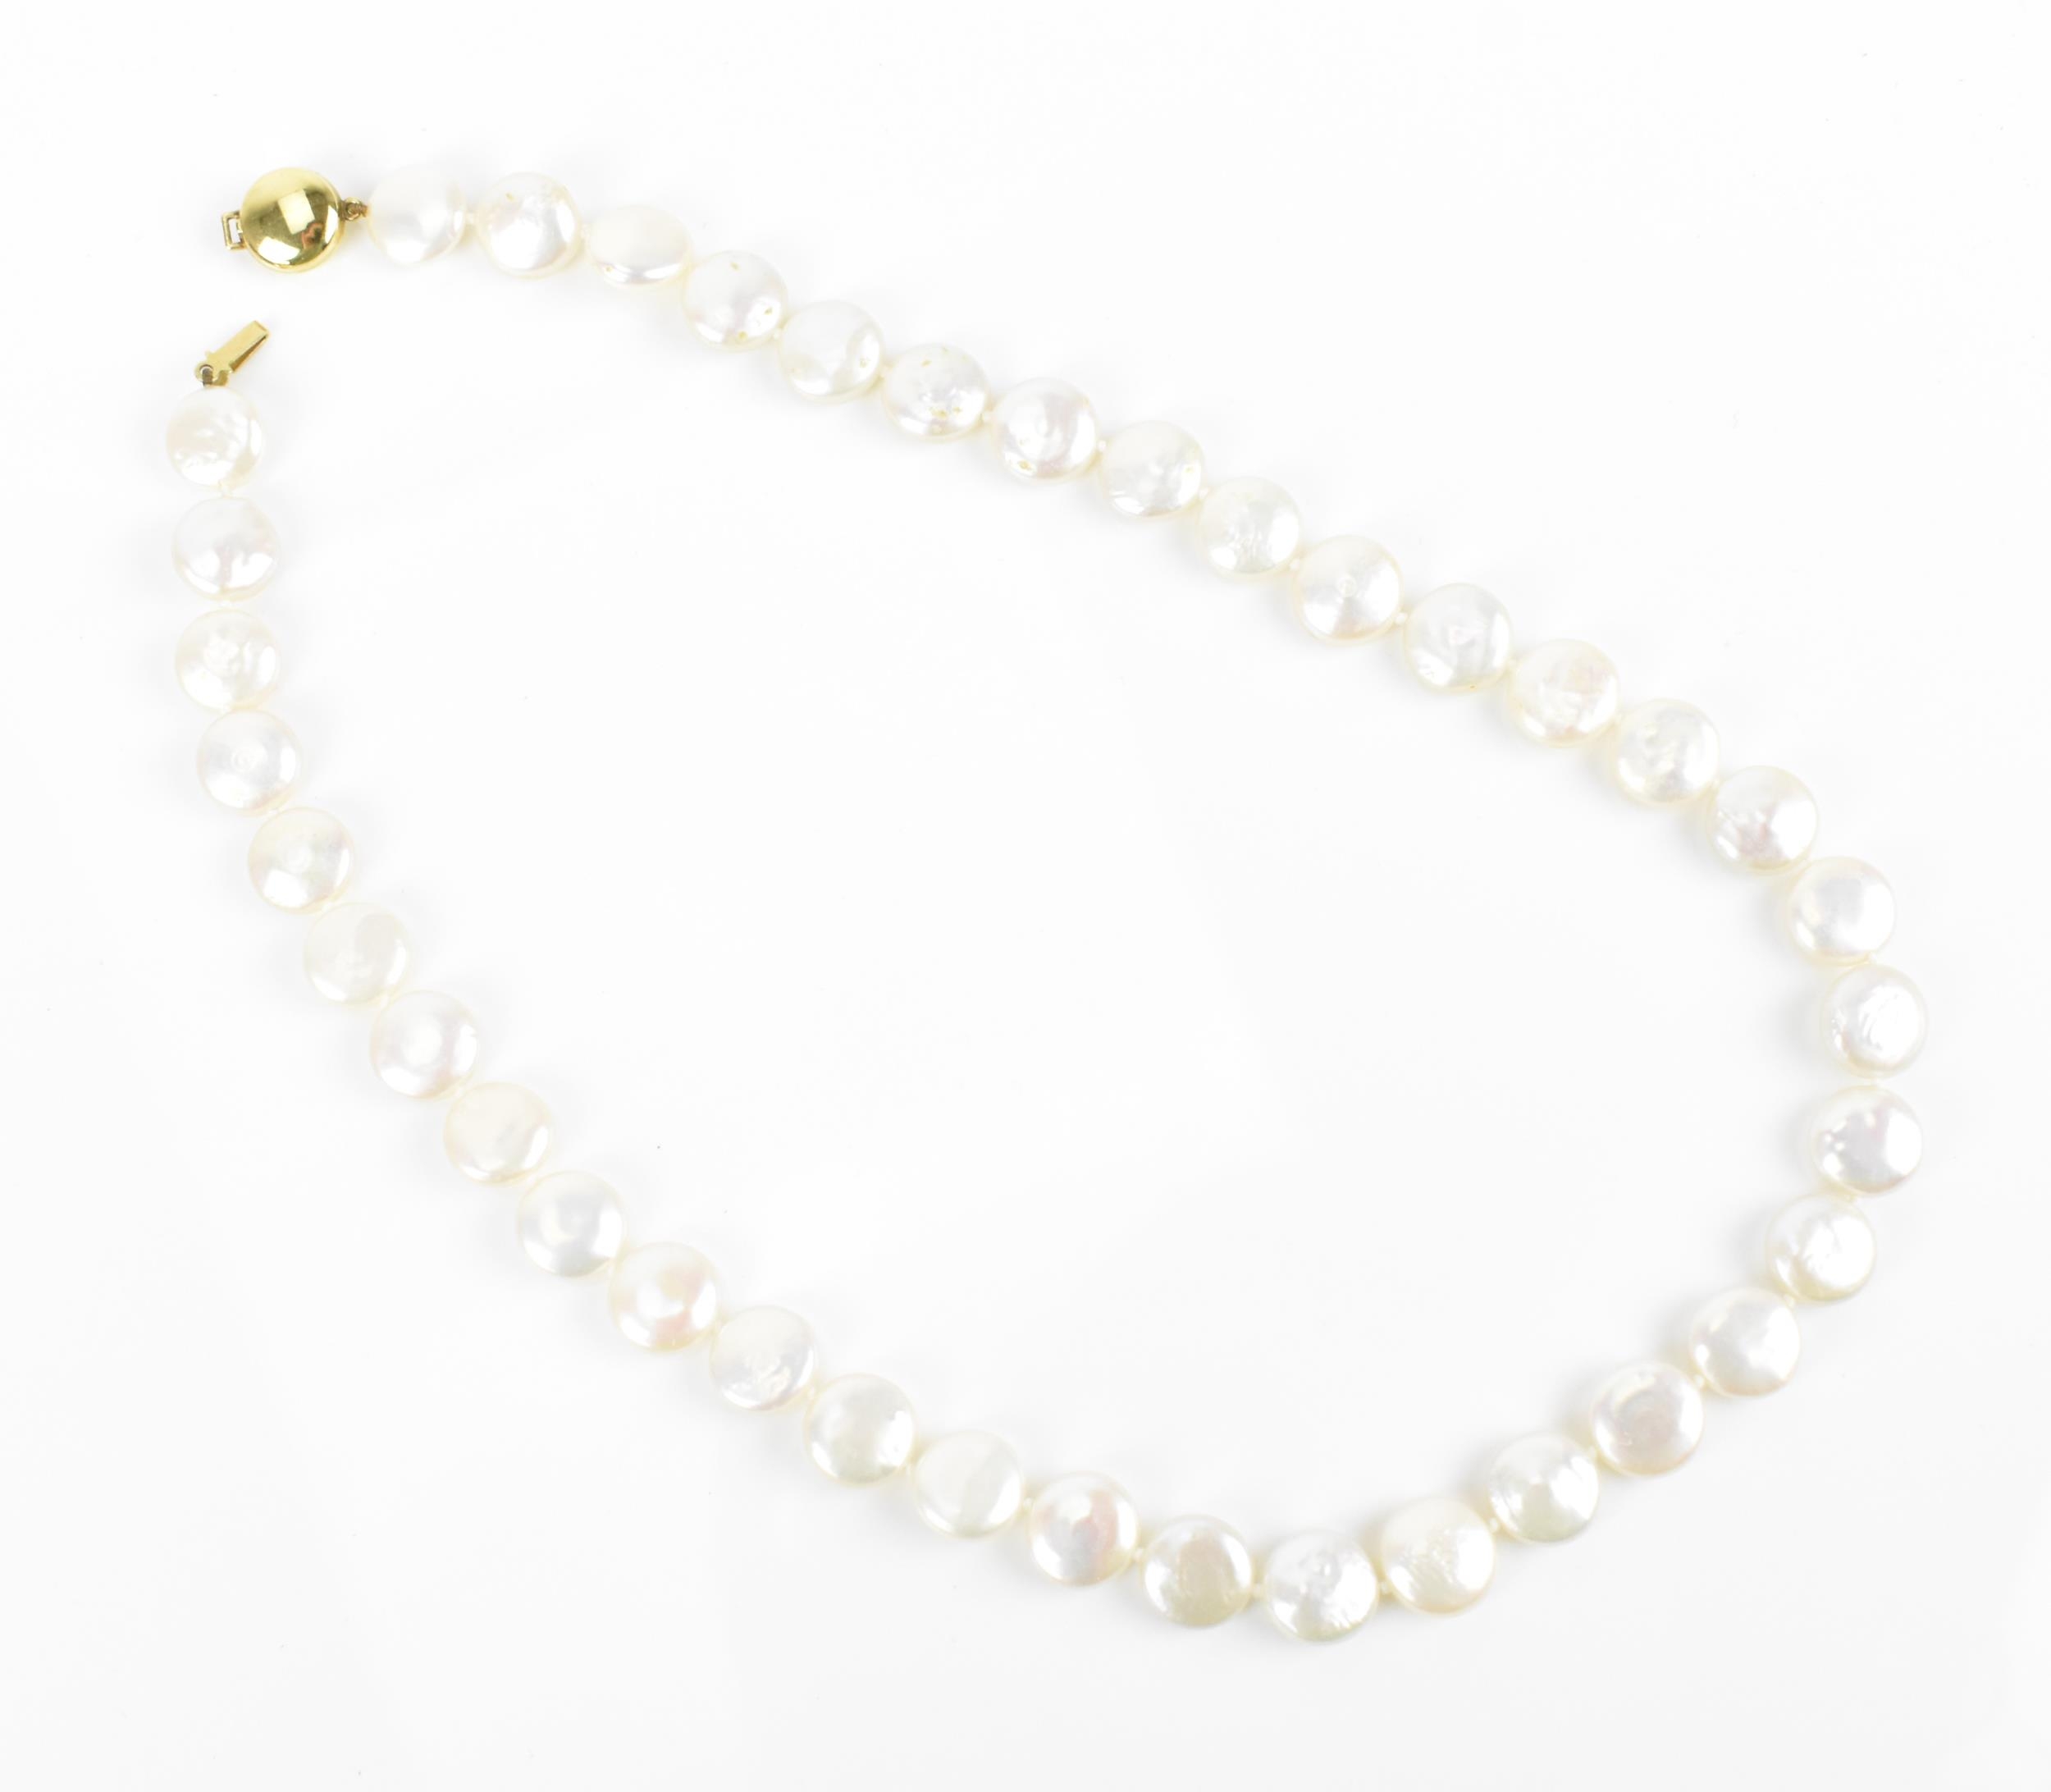 A single strand flat coin pearl necklace with 9ct yellow gold catch clasp, 45 cm long, the catch